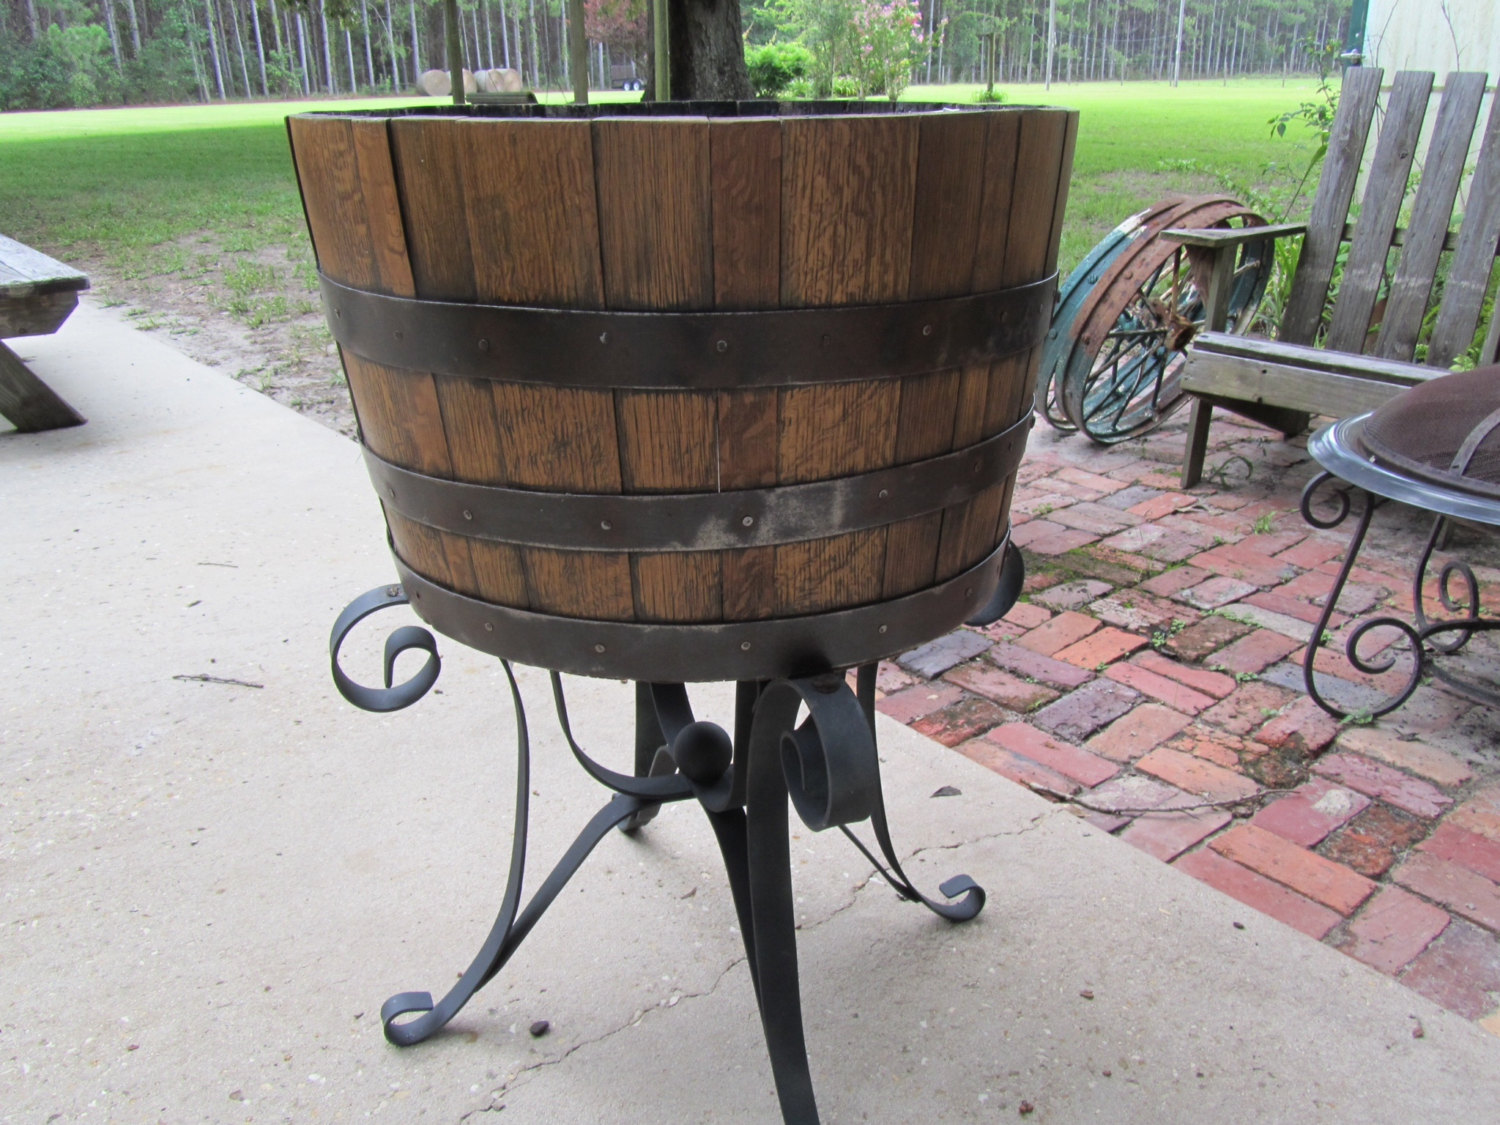 Whisky Barrel Furniture Is Rustic And Classy